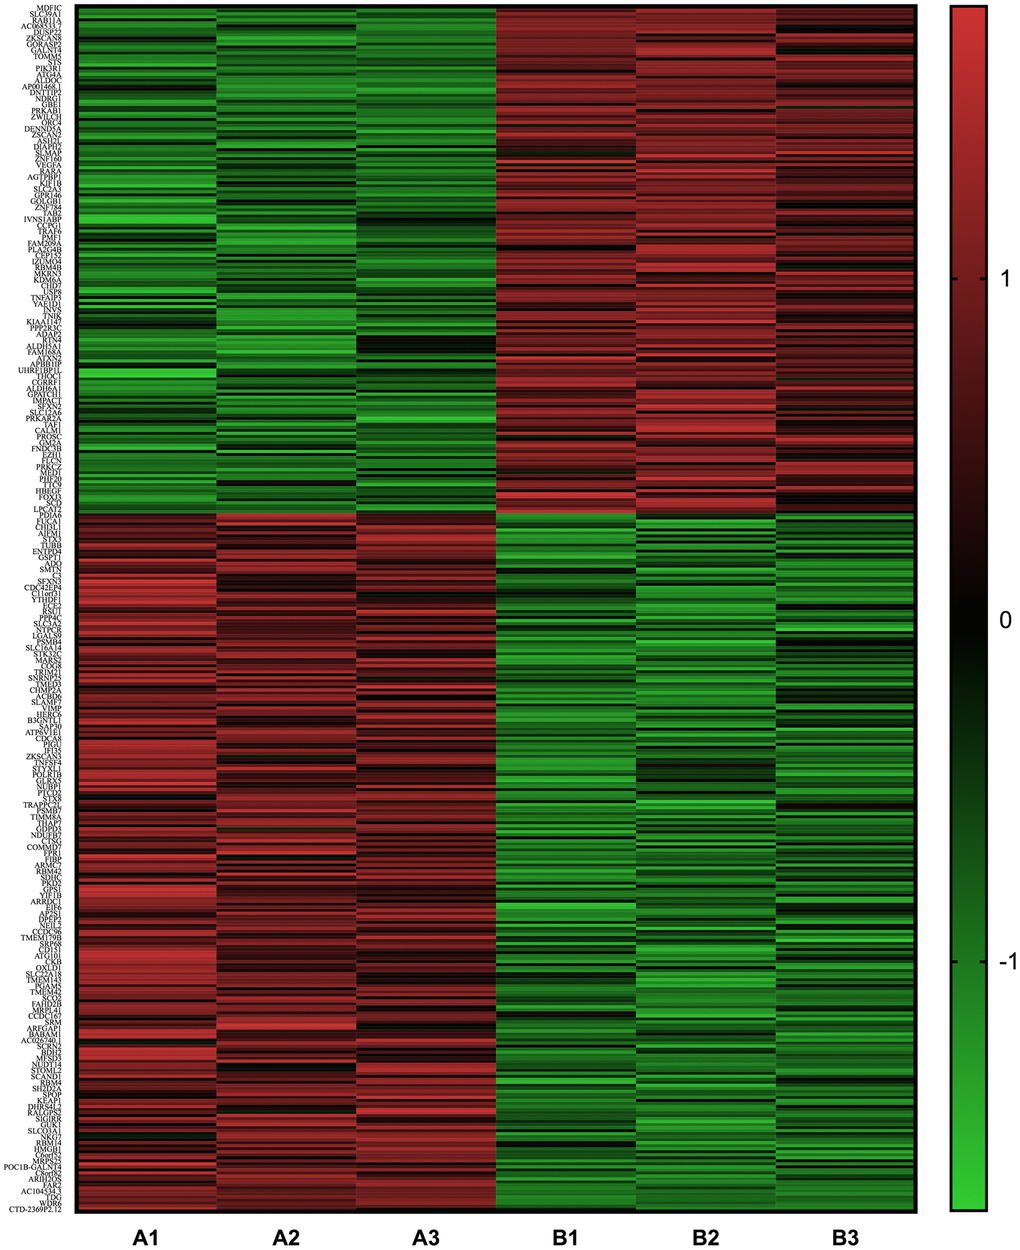 Heat map of the differentially expressed mRNA between neutrophils that were incubated with advanced glycation end products (AGEs) and neutrophils that were incubated with bovine serum albumin (BSA).